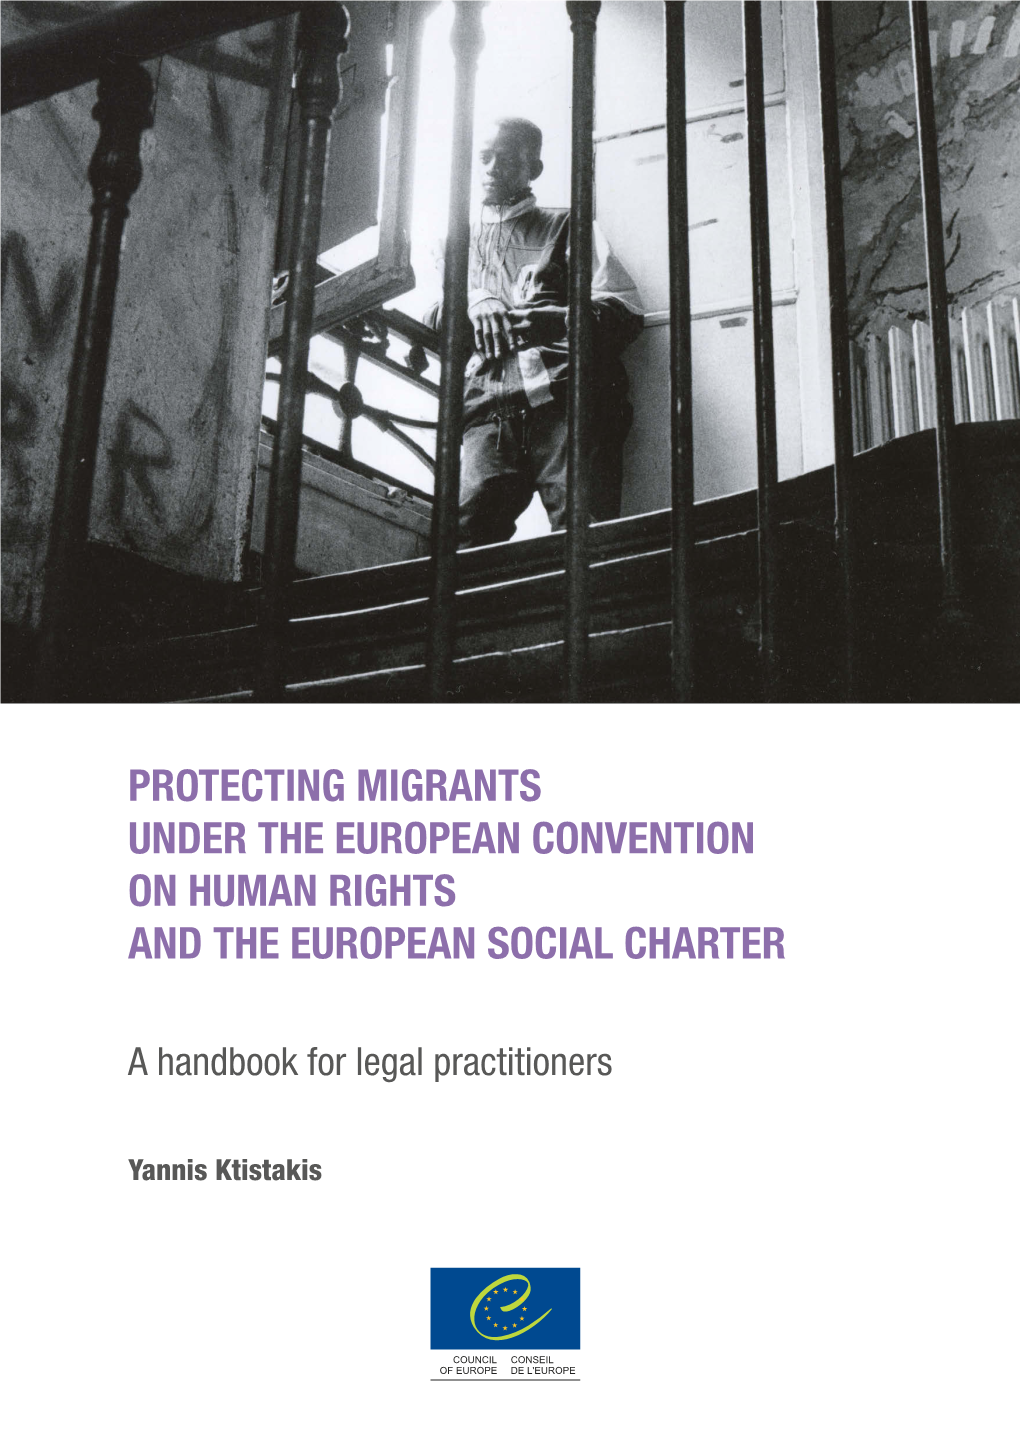 Protecting Migrants Under the European Convention on Human Rights and Social Charter